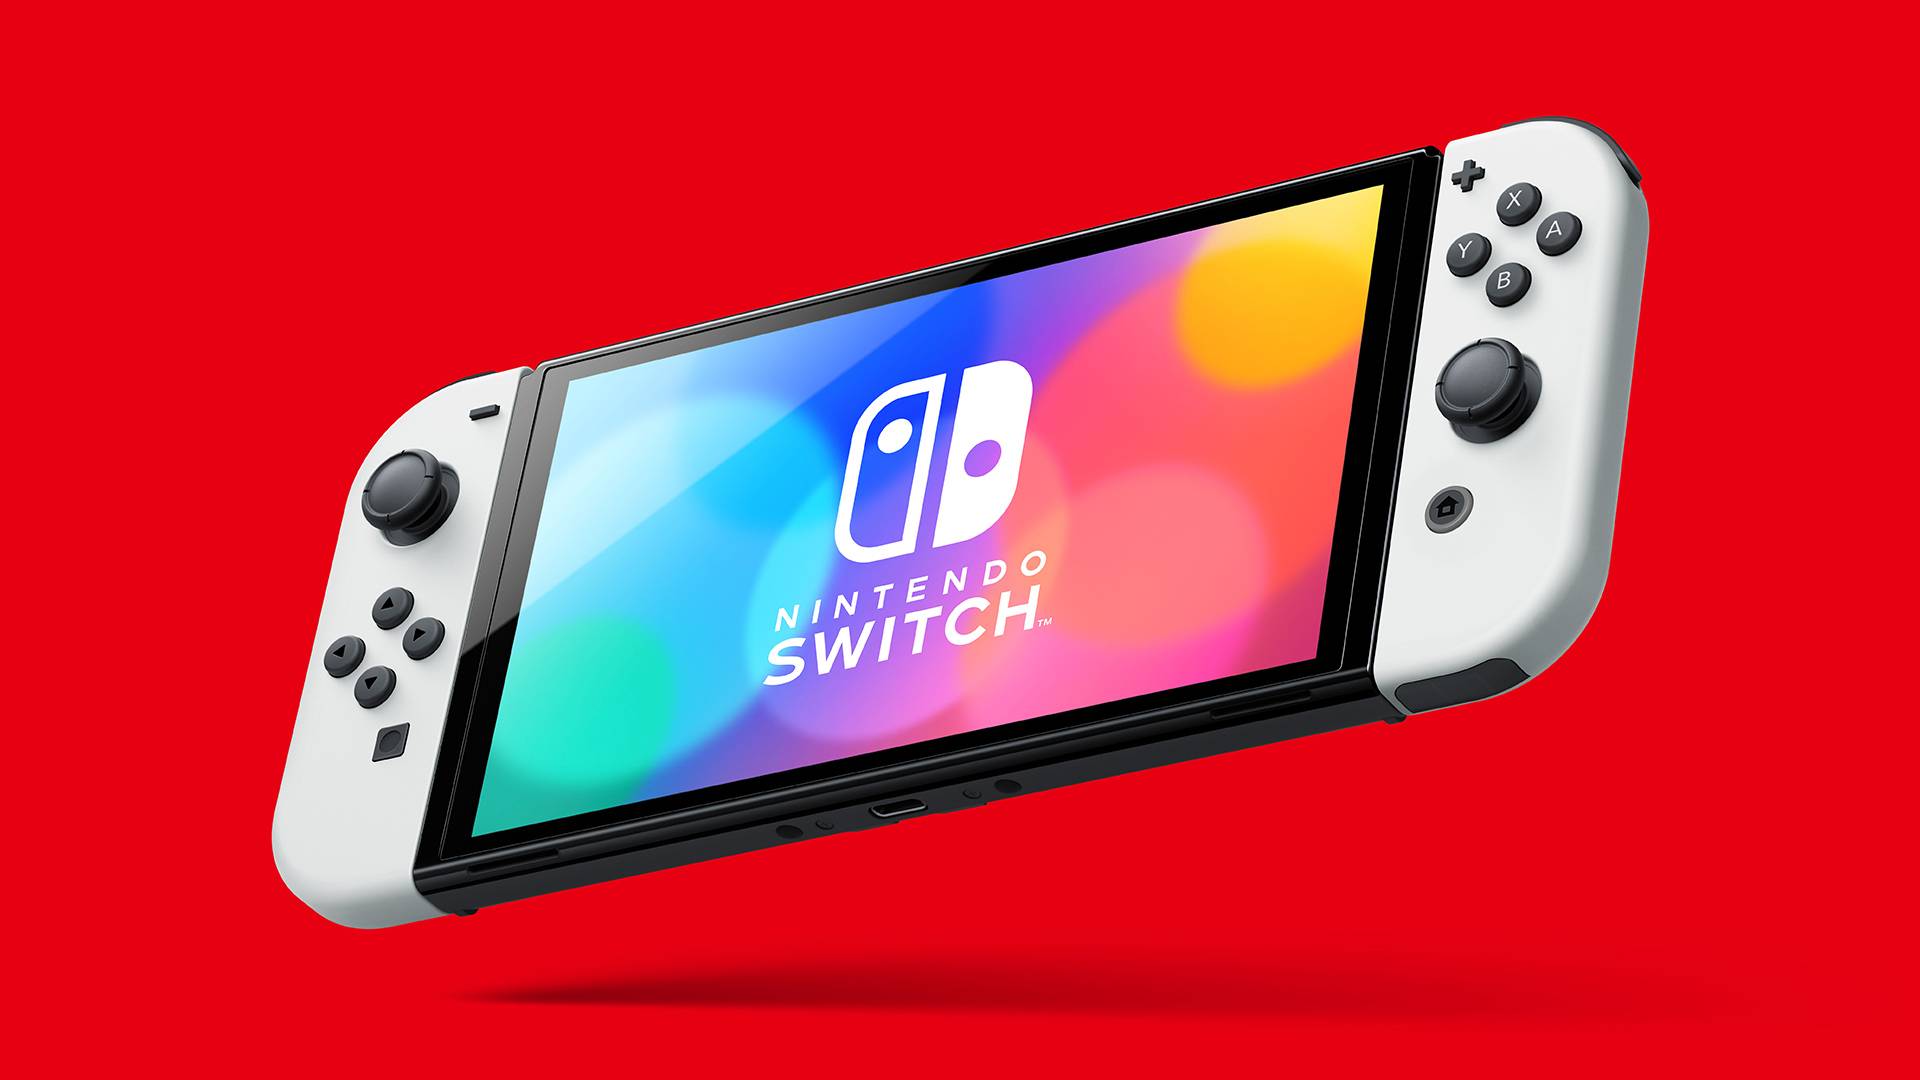 The new Nintendo Switch OLED model appears in front of a red background